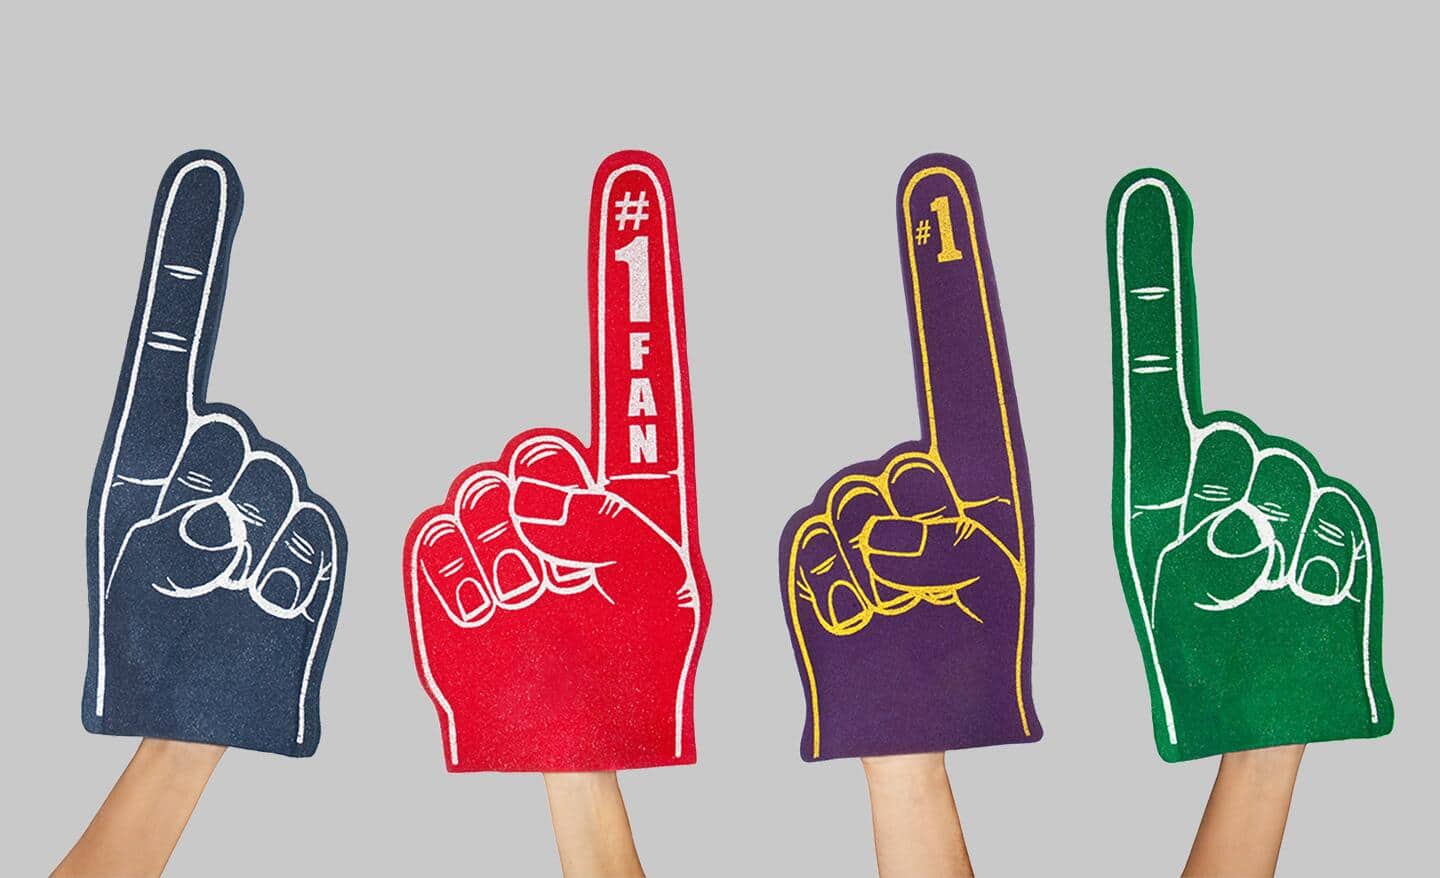 Hands holding foam sports fingers in different team colors.